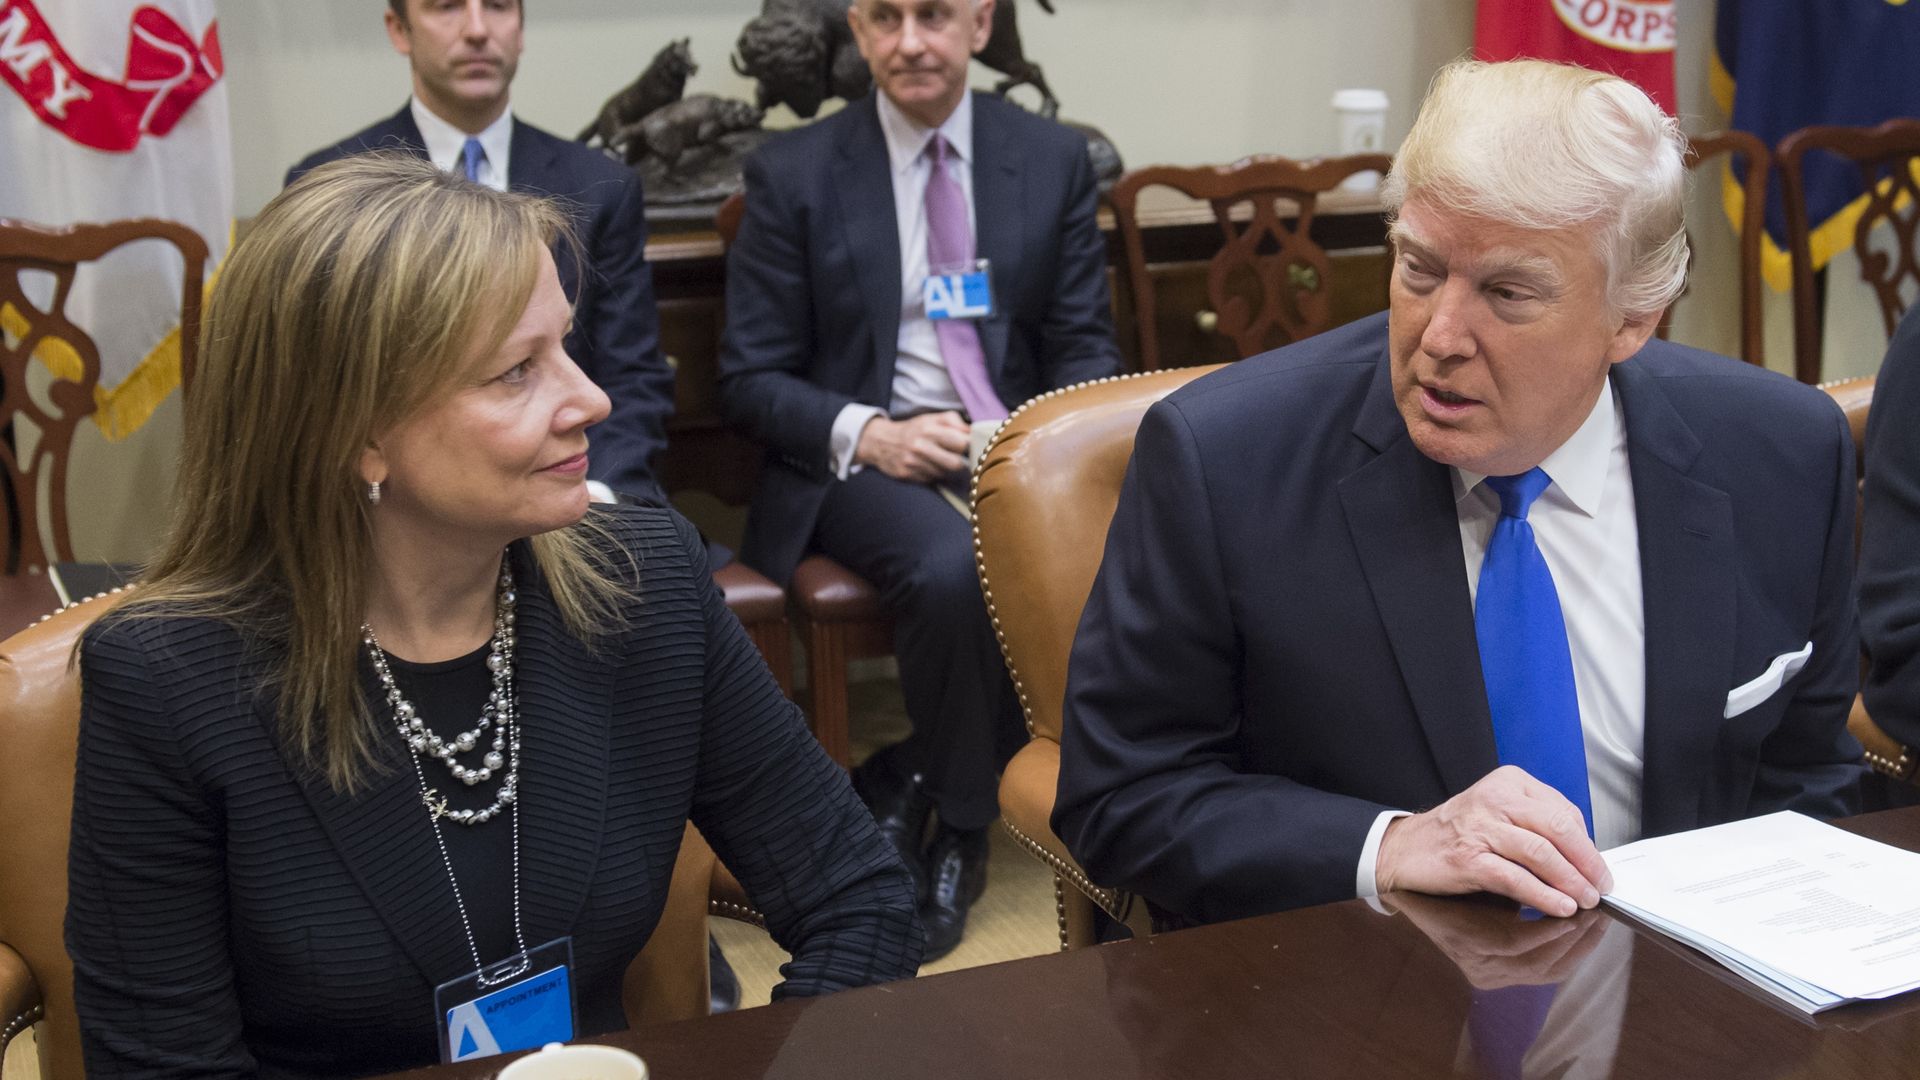 US President Donald Trump speaks with General Motors CEO Mary Barra during a meeting with automobile industry leaders in the Roosevelt Room of the White House in Washington, DC, January 24, 2017.